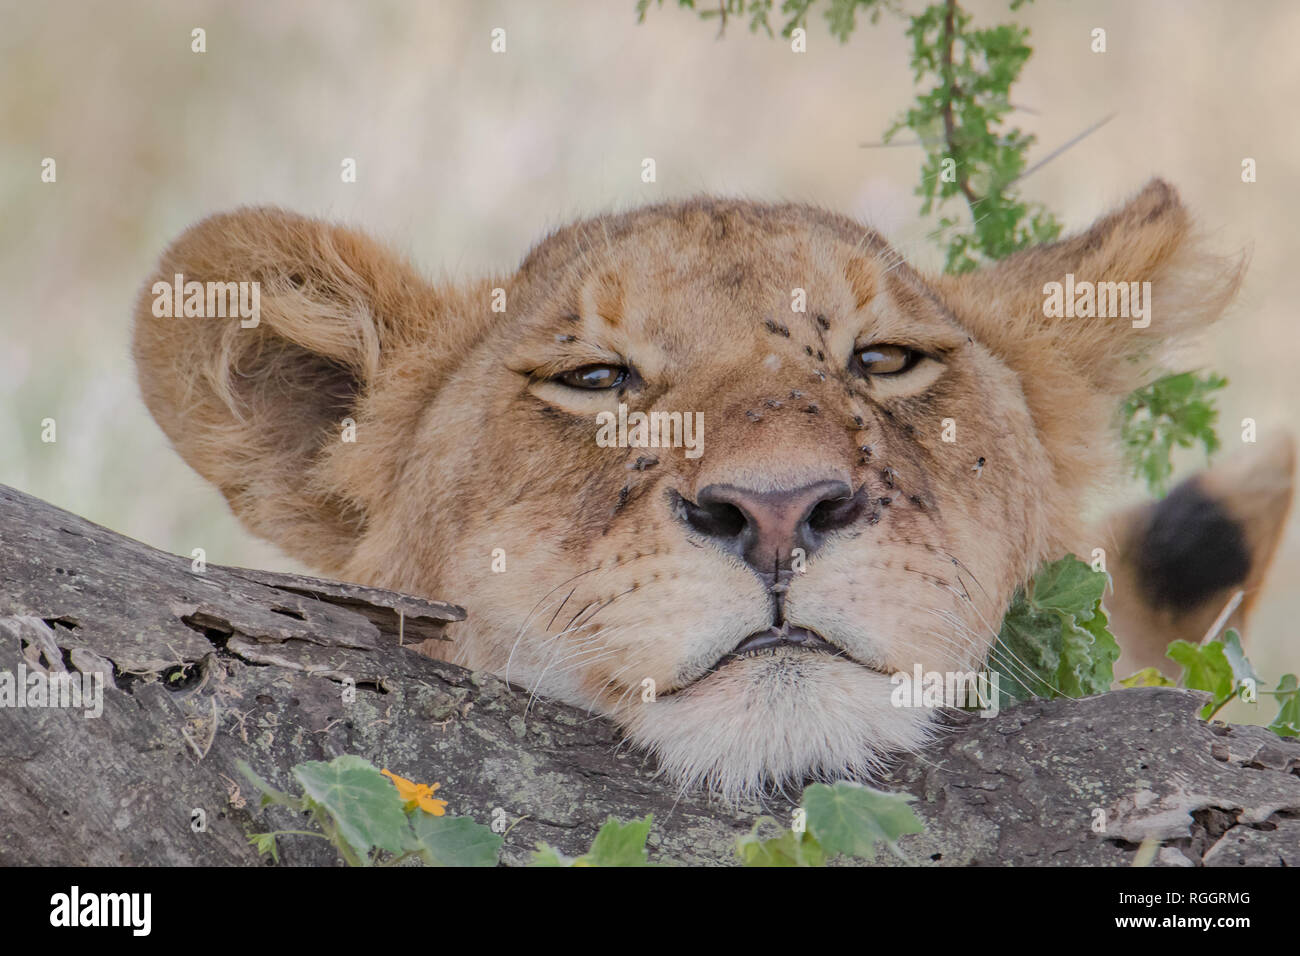 Portrait of a young lion's face Stock Photo